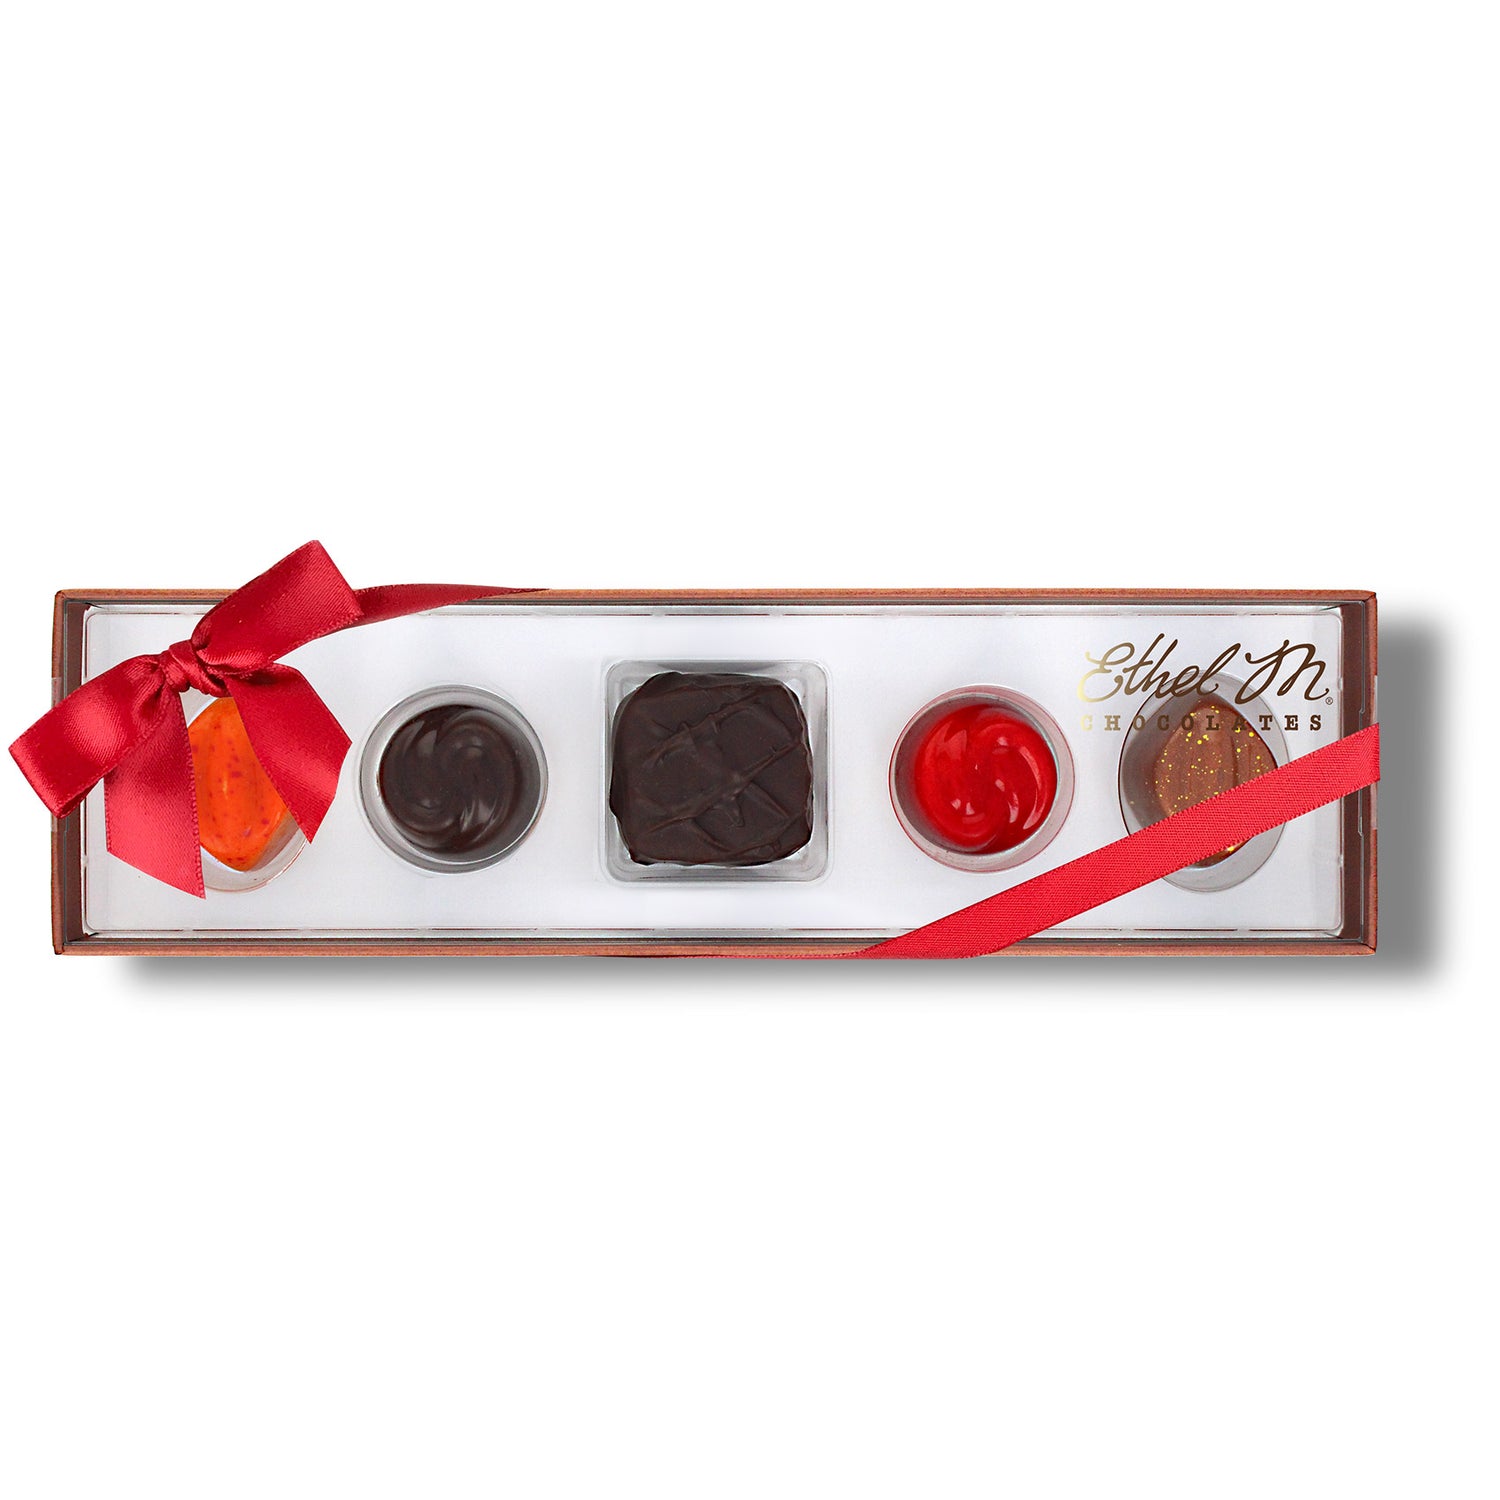 Holiday M&M's flavors: Pumpkin Pie, Pecan Pie and Holiday Mint